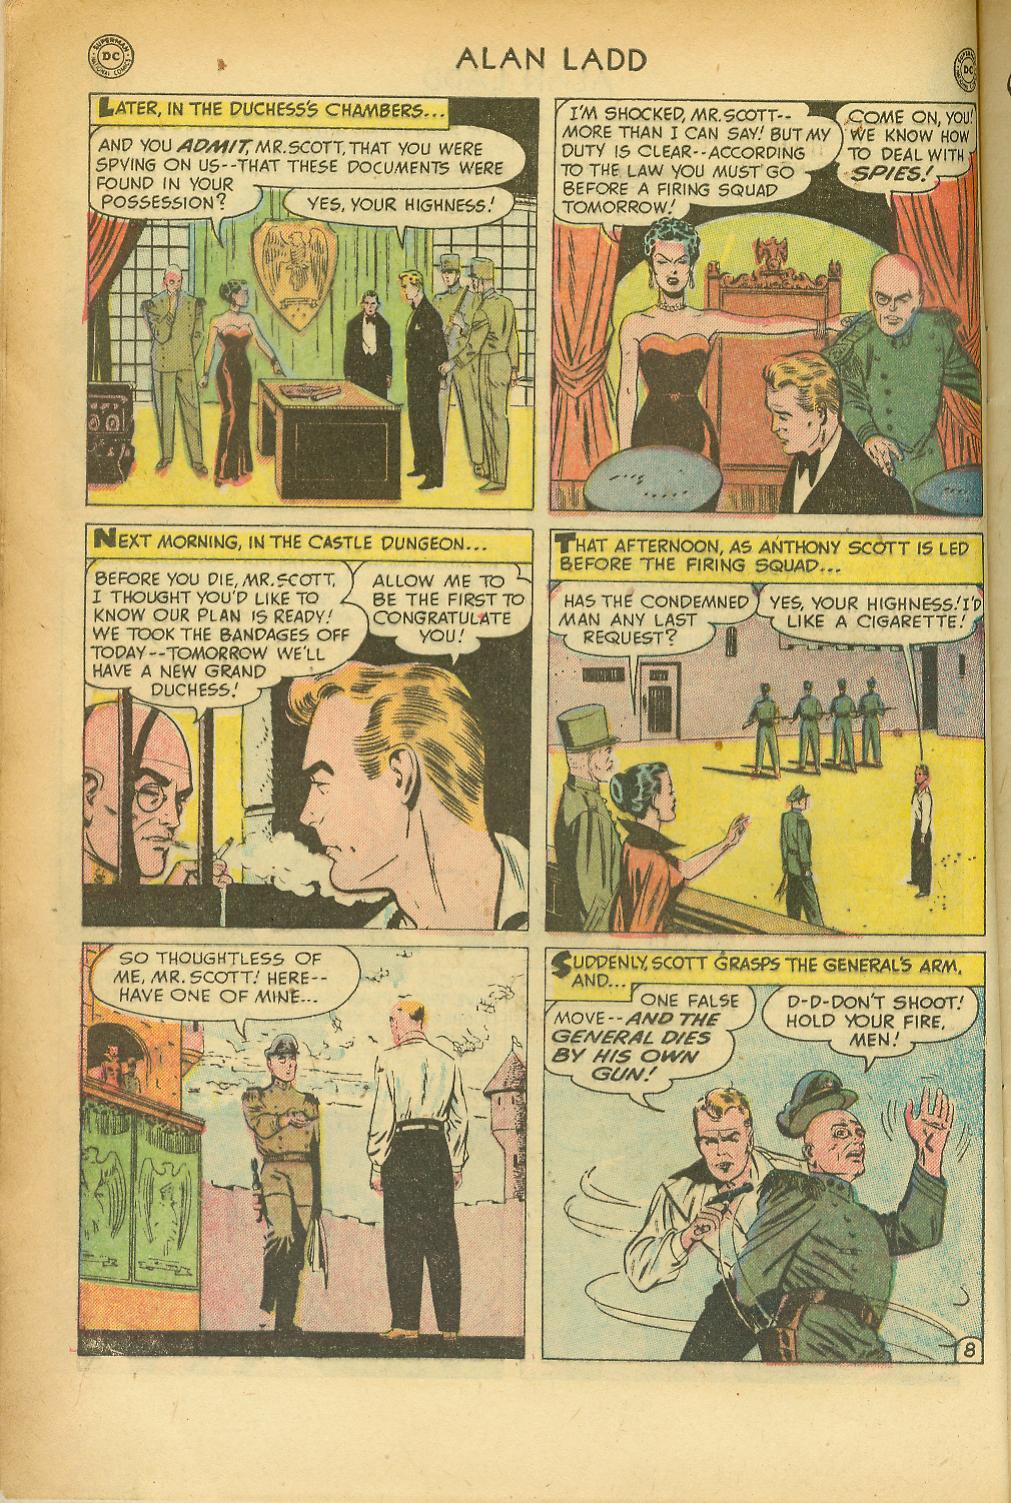 Read online Adventures of Alan Ladd comic -  Issue #8 - 10